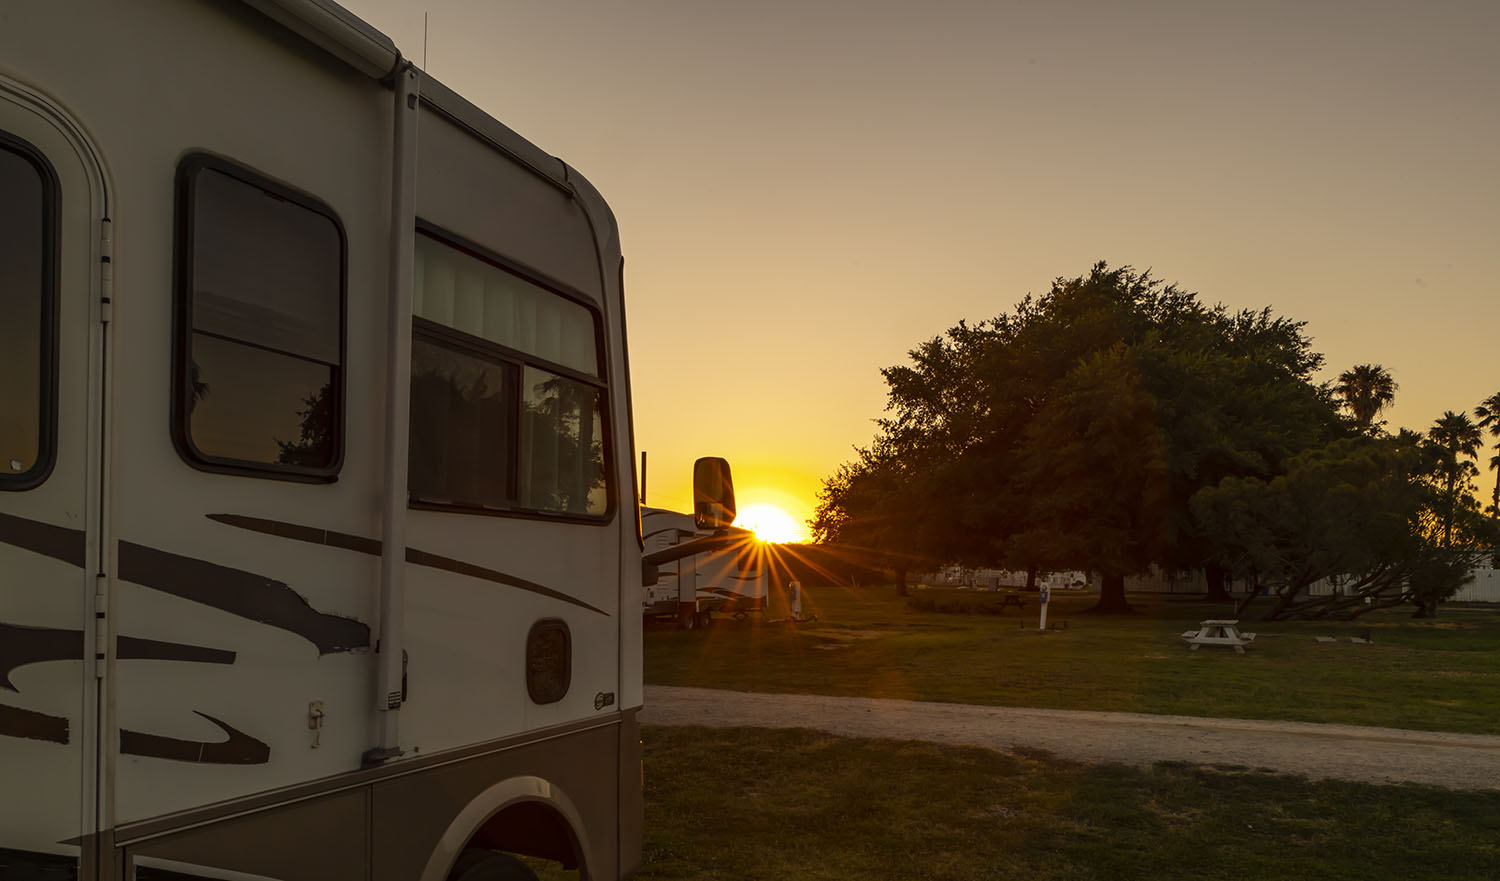 Motorhomes parked in campgrounds at sunrise on nice sunny days